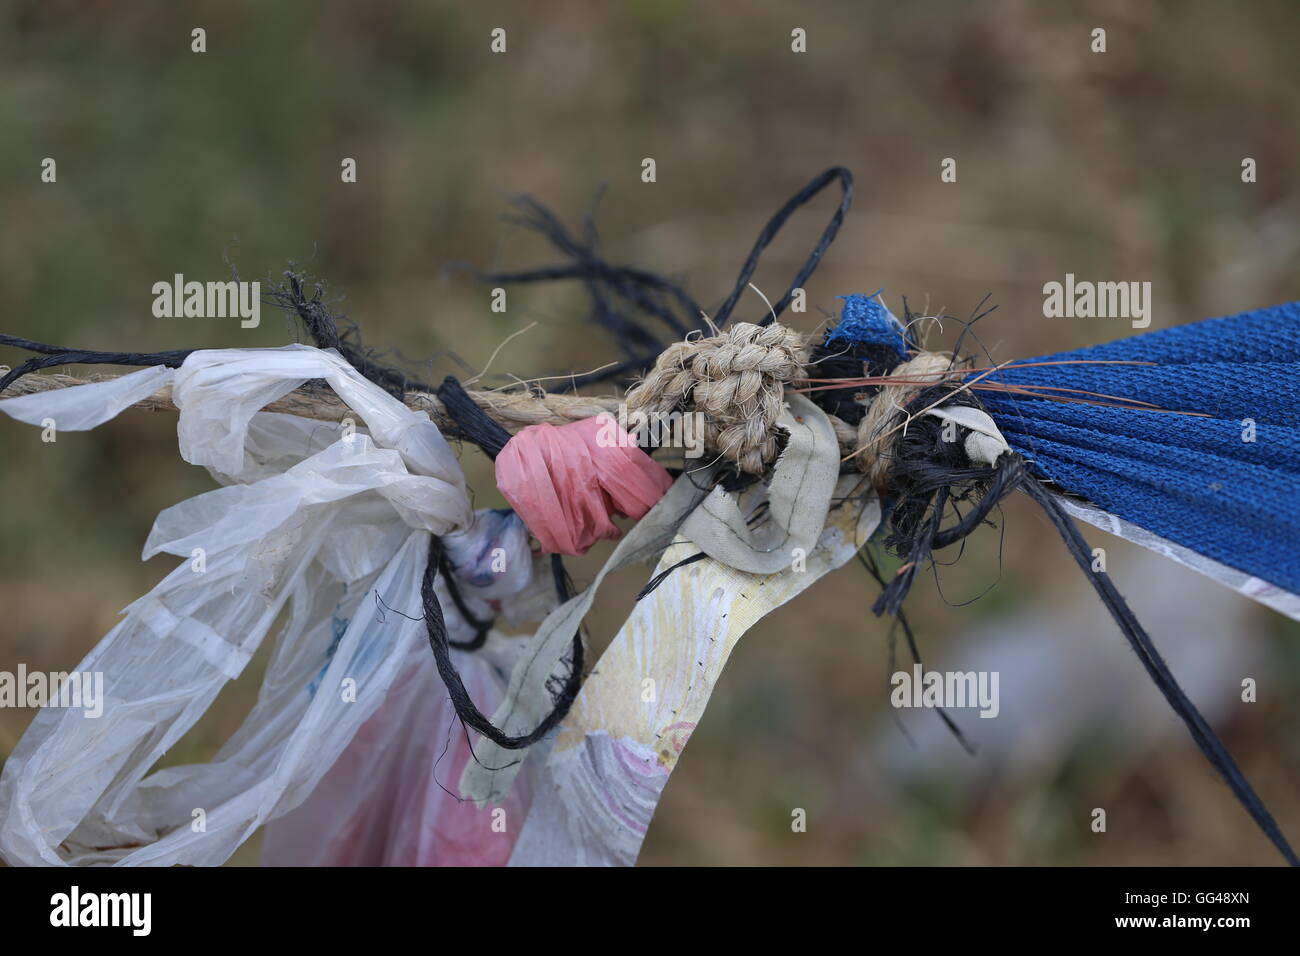 Tied Up Ropes, Tightrope. Tightrope, brown rope, black rope and colored plastic bags tied up with blue shade netting. Stock Photo